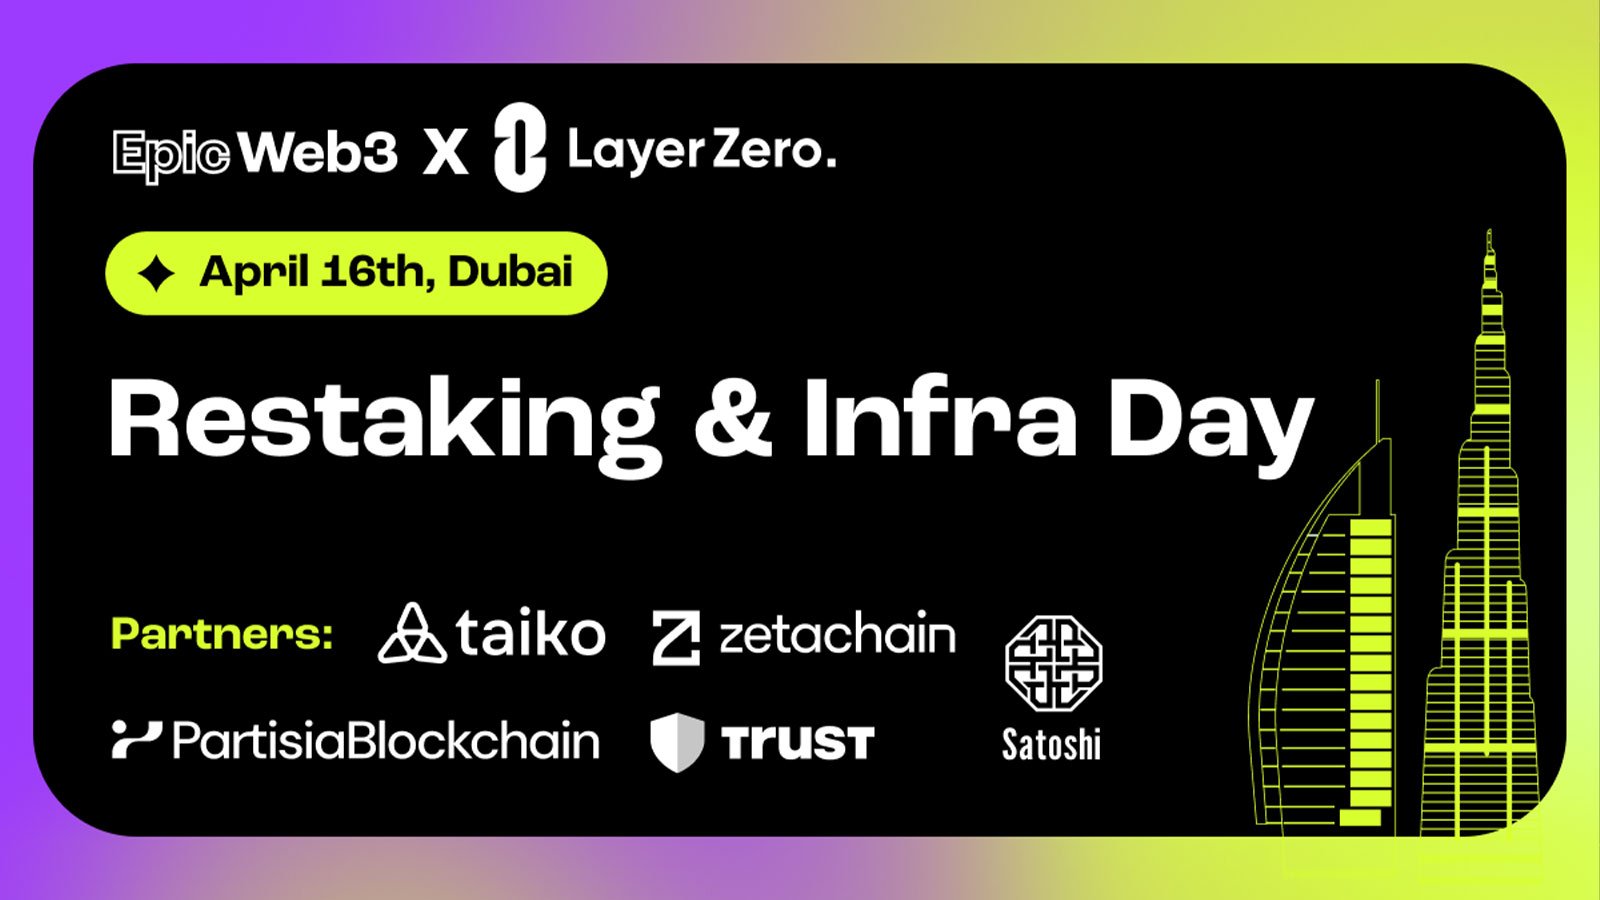 Learn about Restaking and Ethereum Infrastructure in Dubai